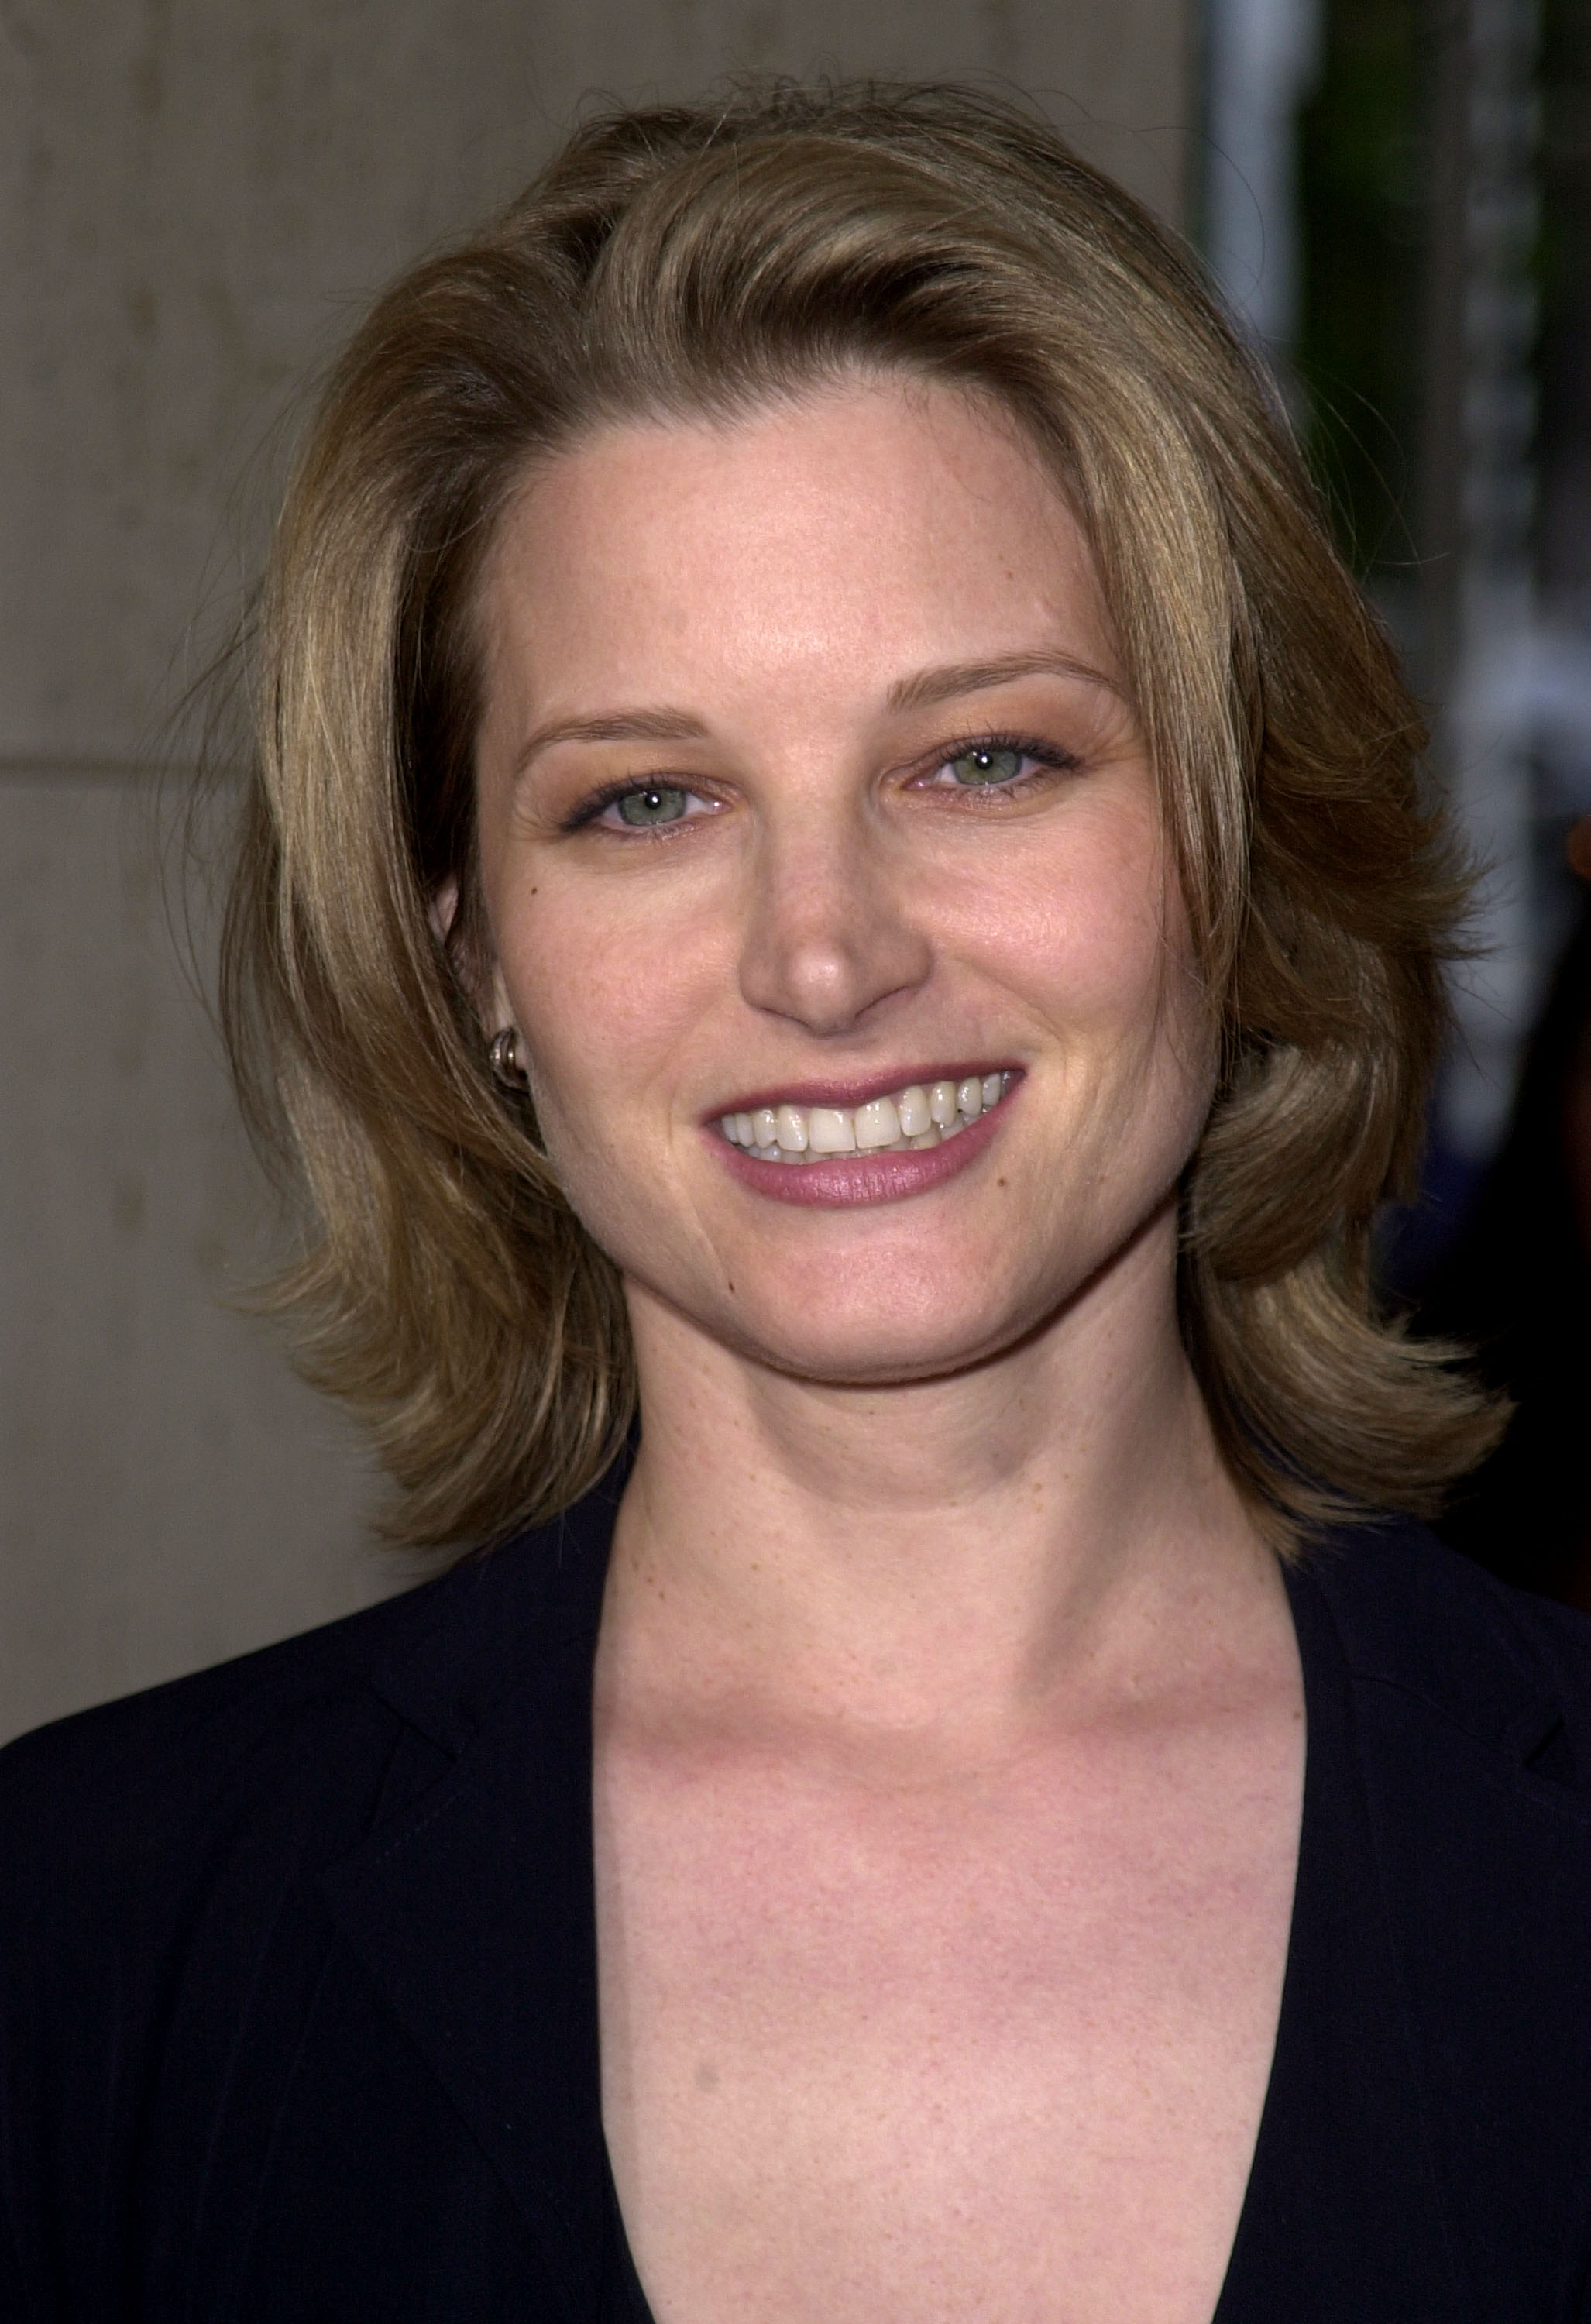 Bridget Fonda at the "Kiss Of The Dragon" premiere in California | Source: Getty Images